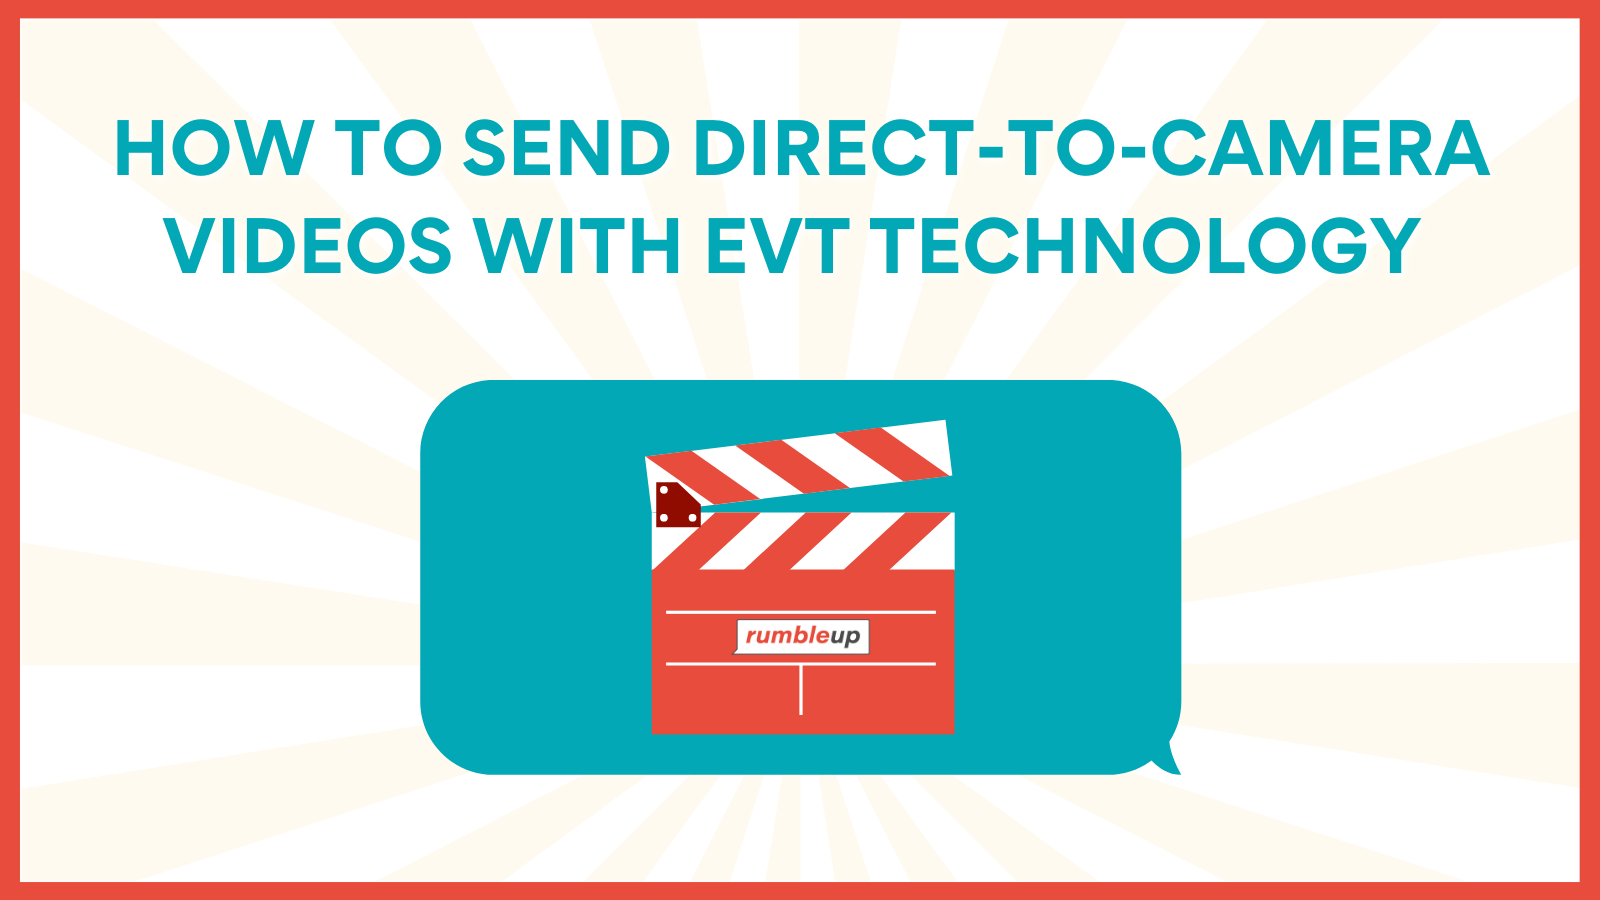 How to Send Compelling Direct-to-Camera Videos with Powerful EVT Technology 